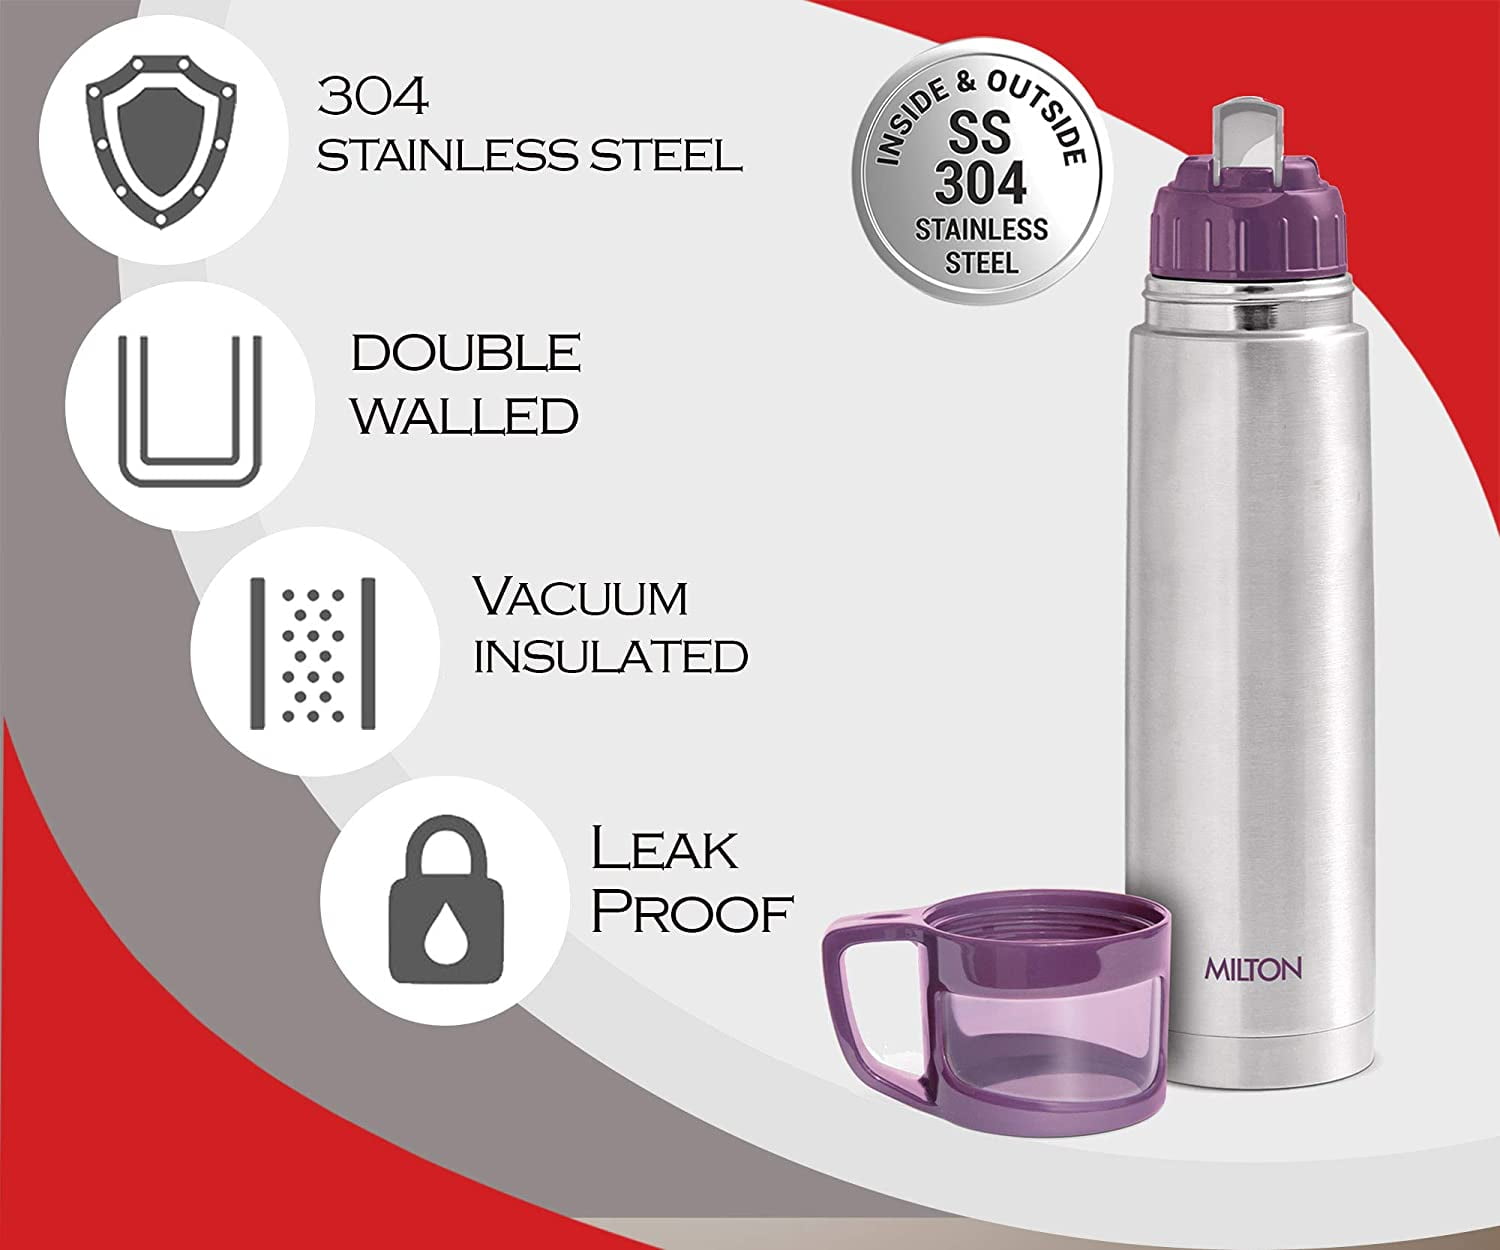 Milton Glassy 500 Thermosteel 24 Hours Hot and Cold Water Bottle